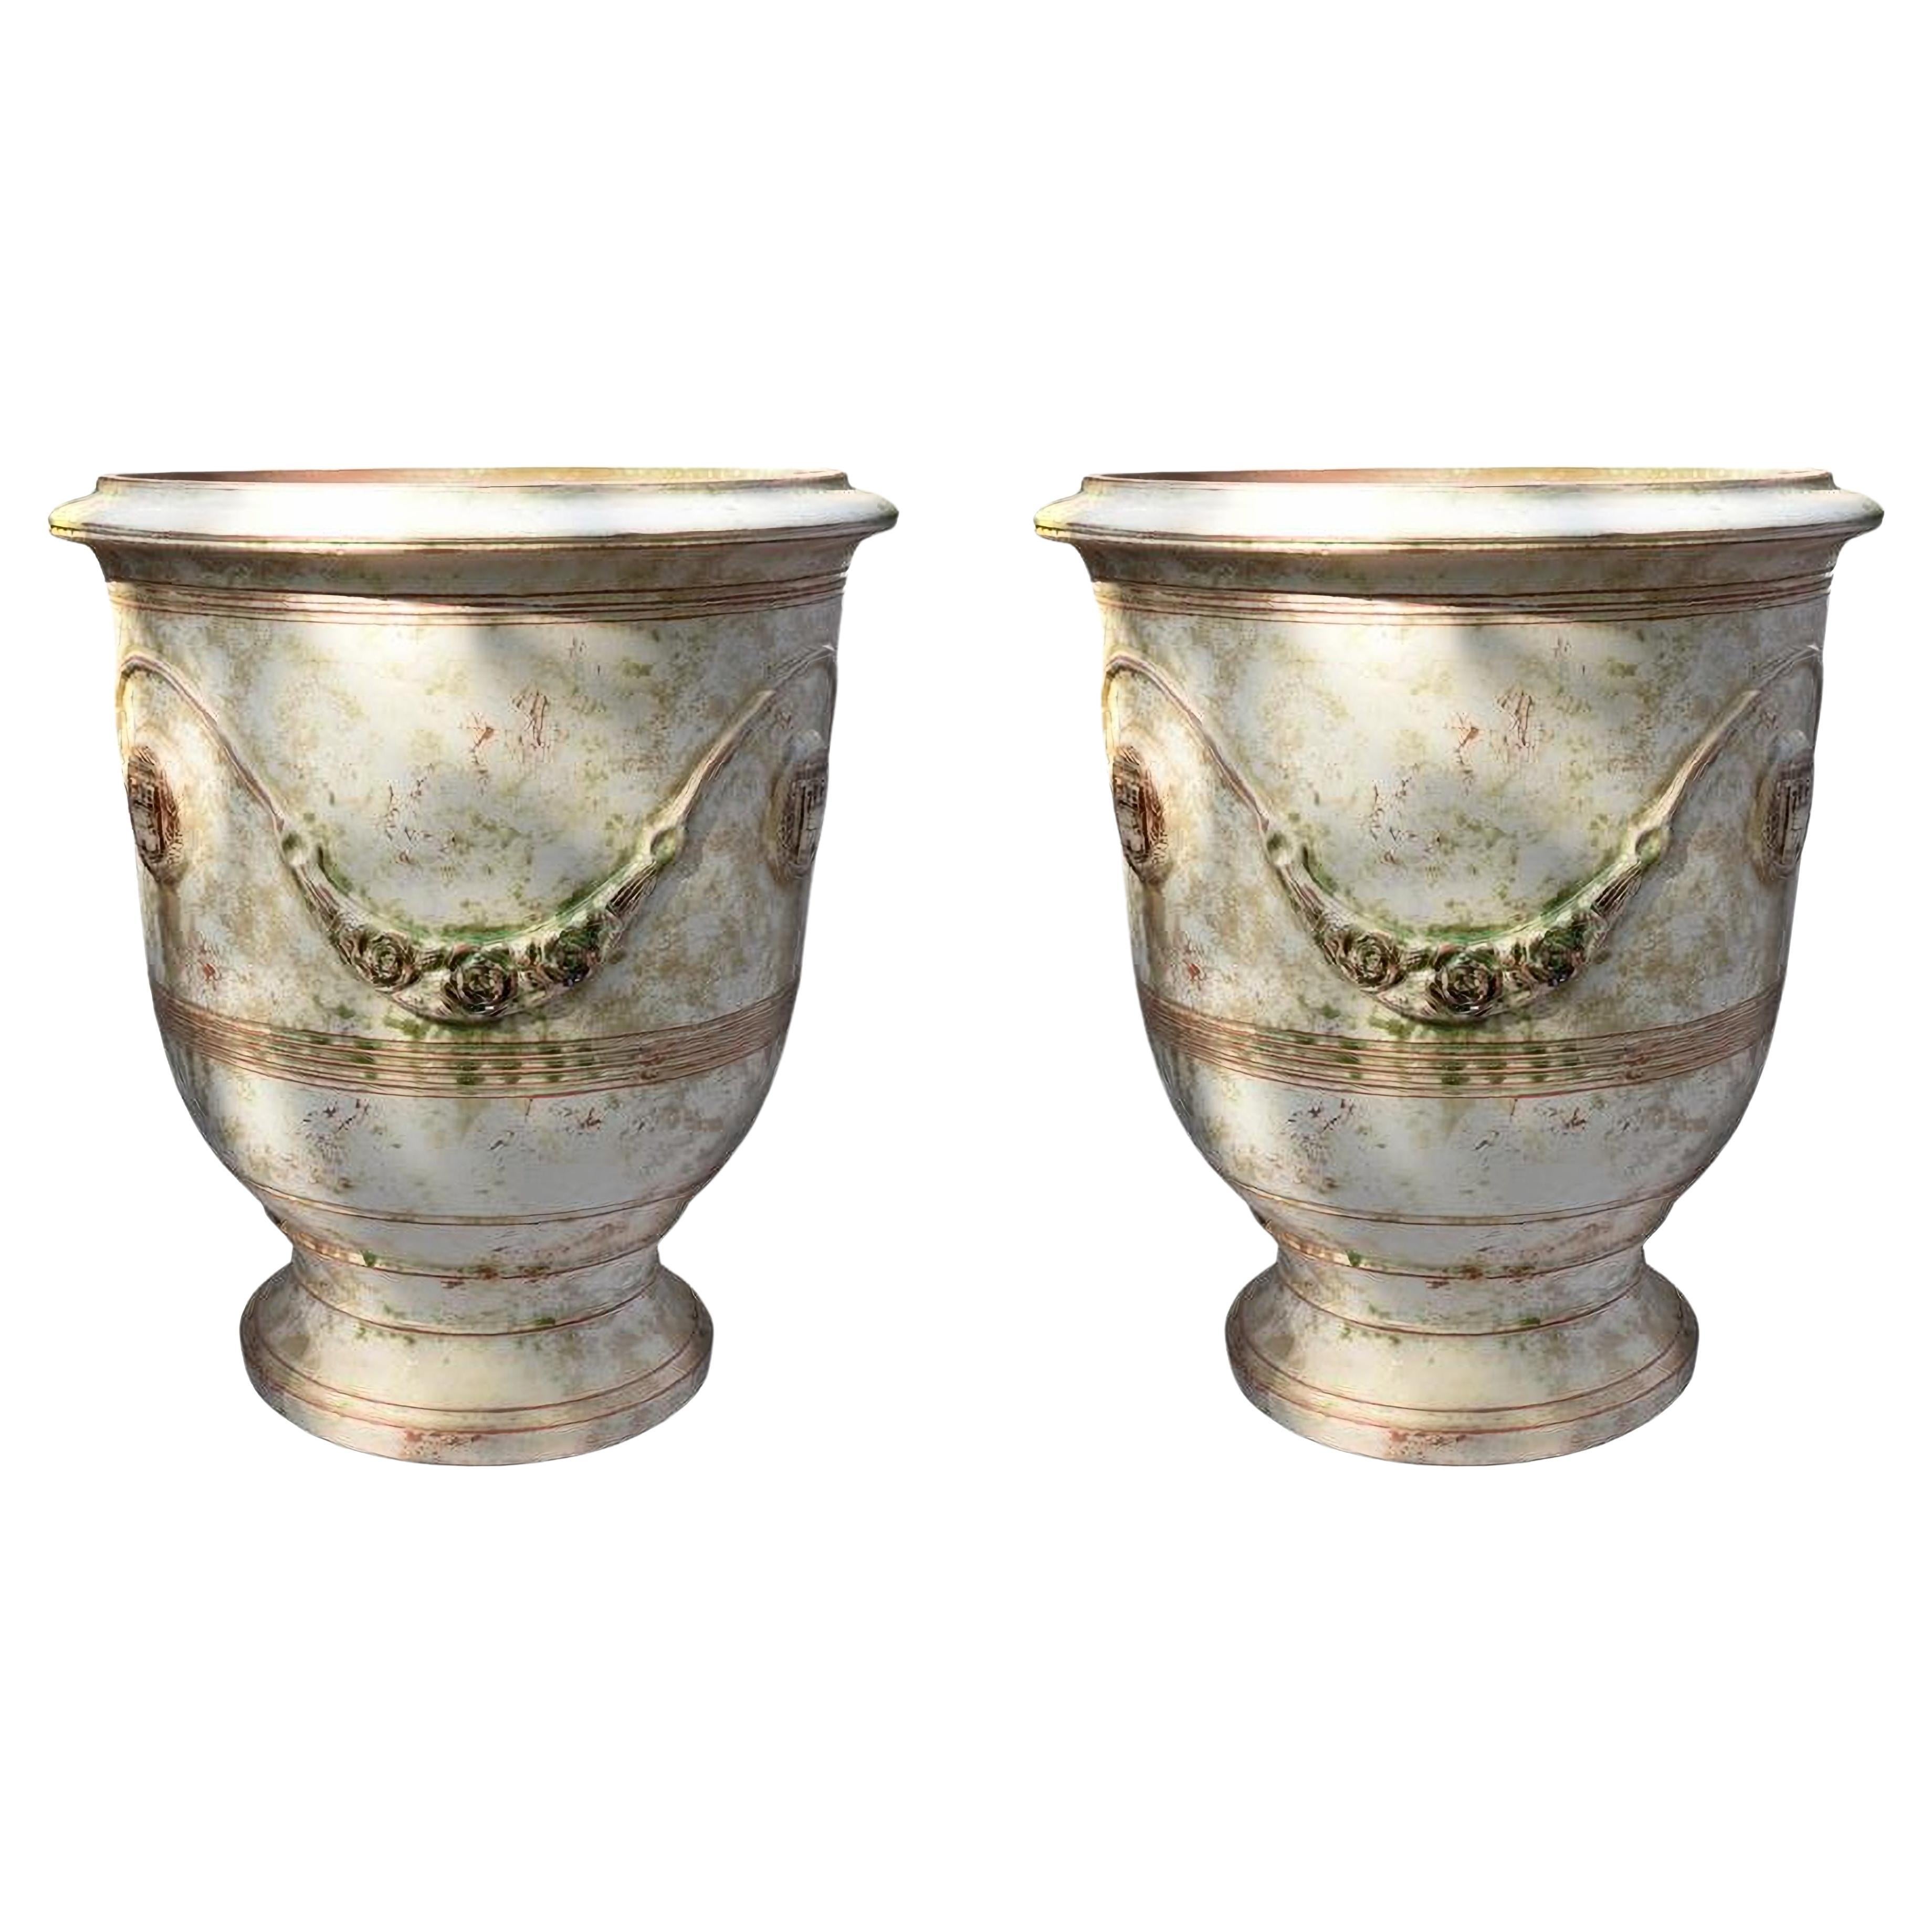 Pair of French Majolica Vase from the Cévennes 'France' Early 20th Century